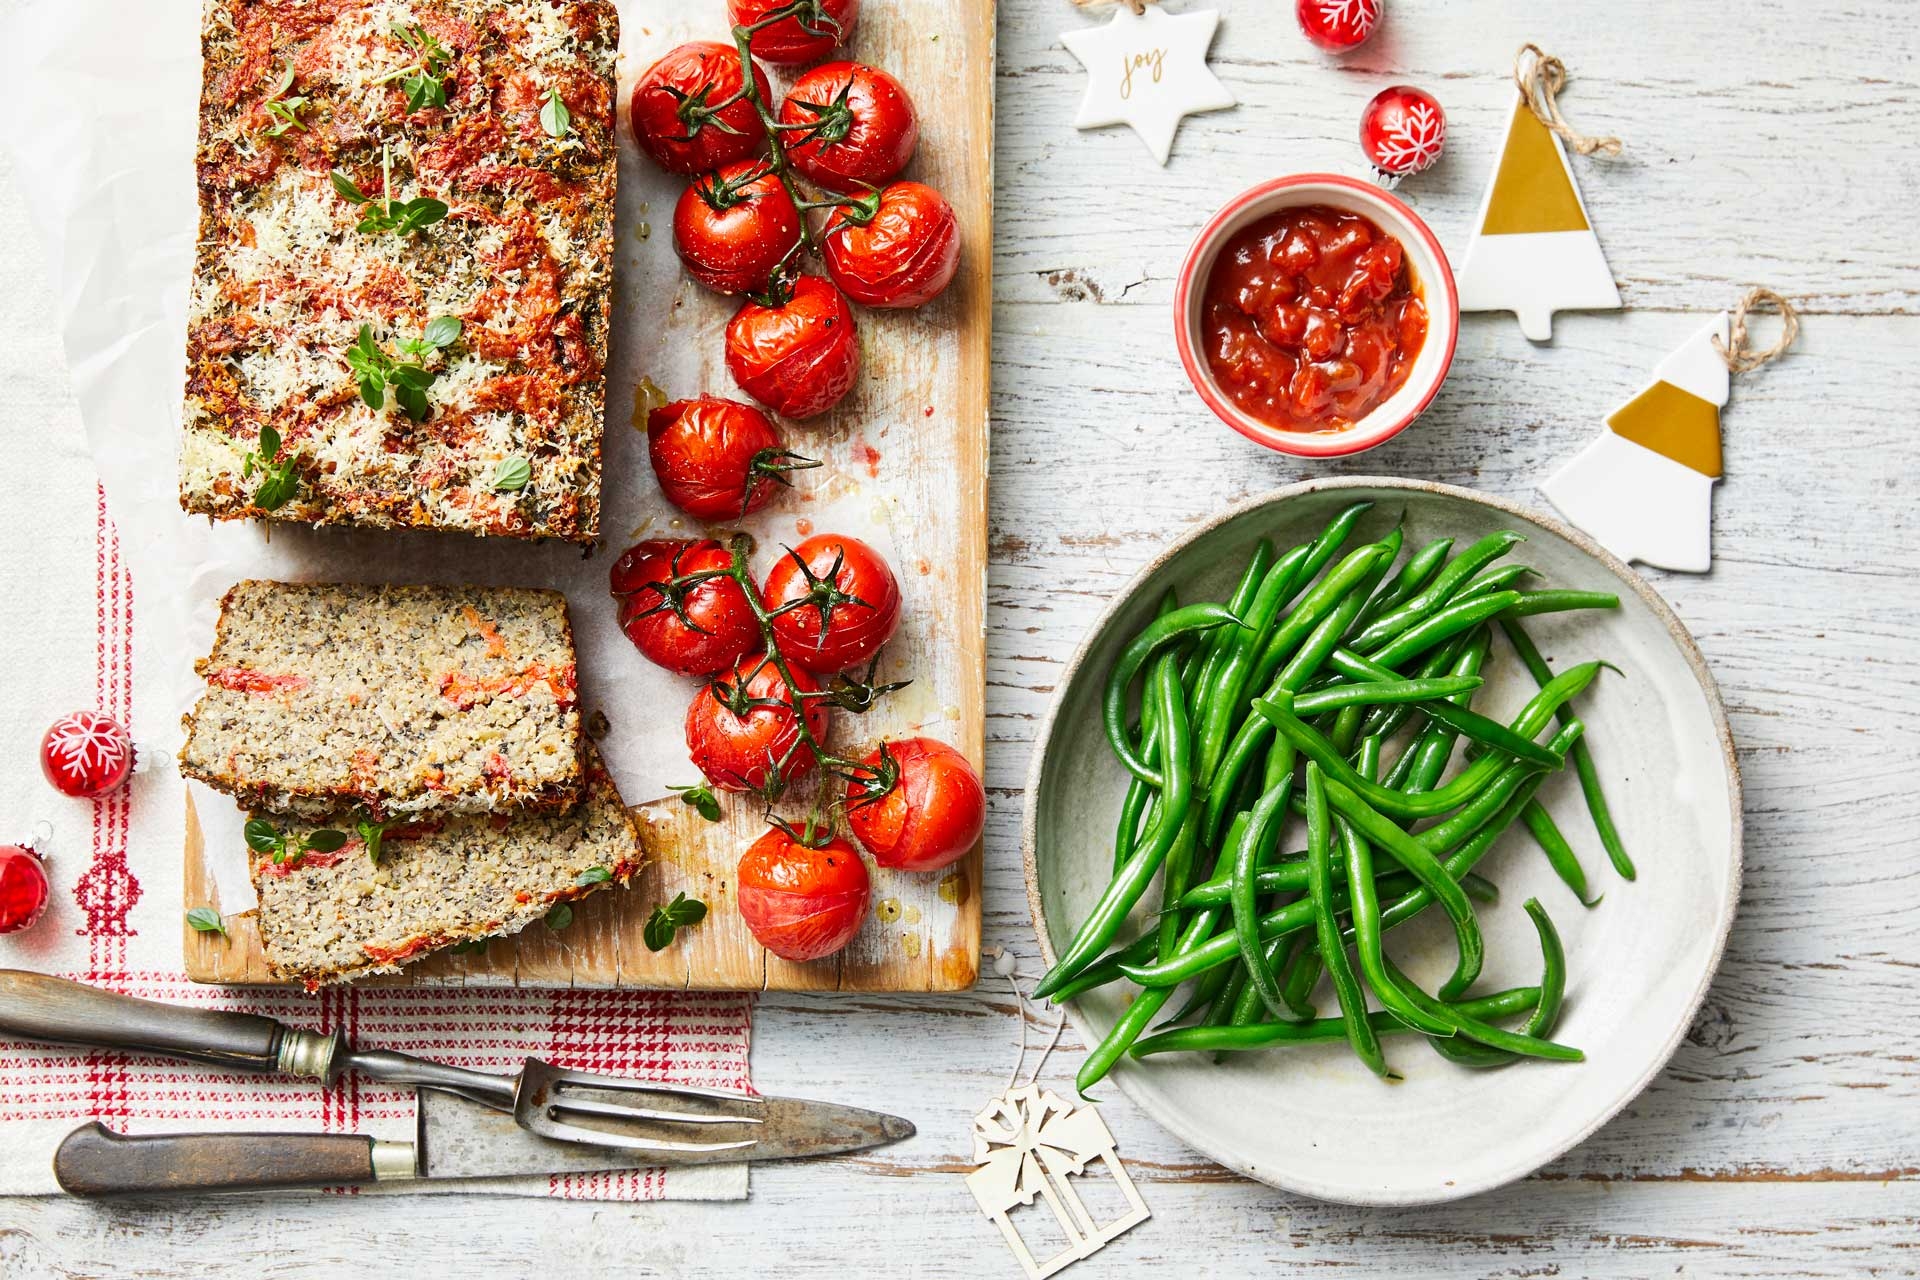 Rustic vegetarian loaf, crisp green beans and juicy tomatoes on a wooden board.